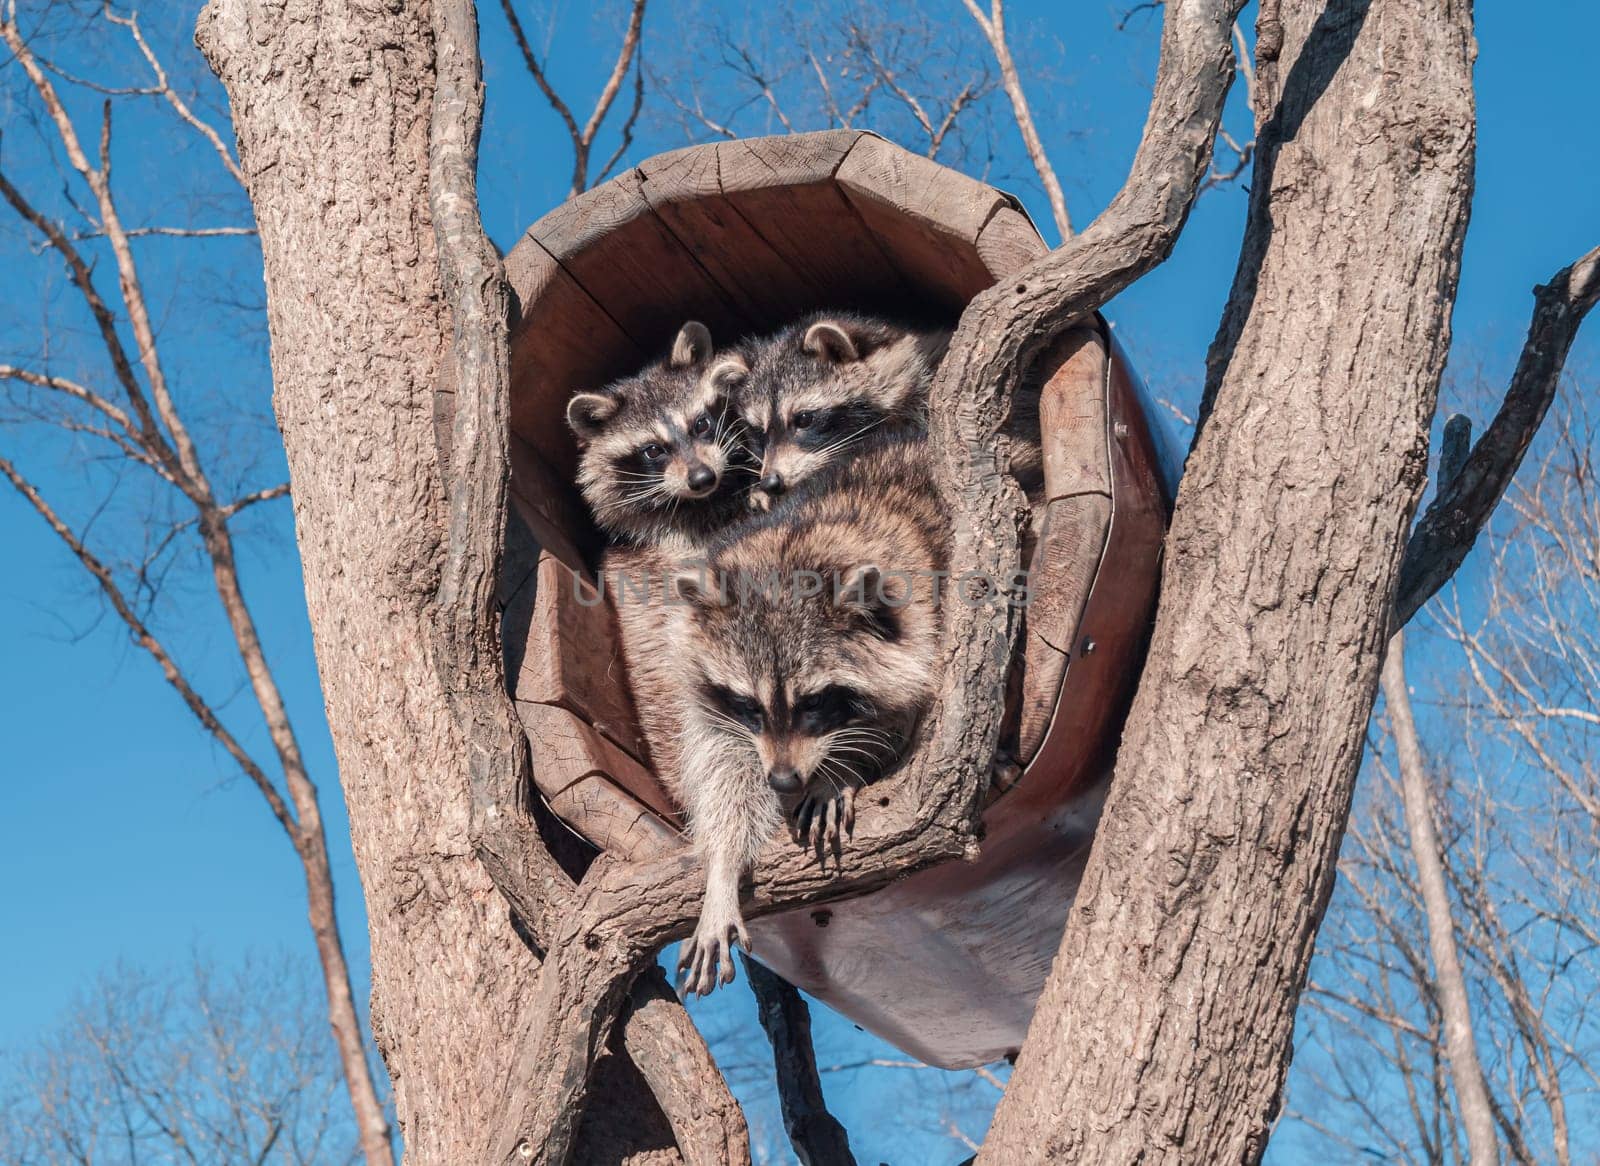 A group of three raccoons is huddled inside the hollow of a tree, with one raccoon reaching out and the others looking on from within. by Busker